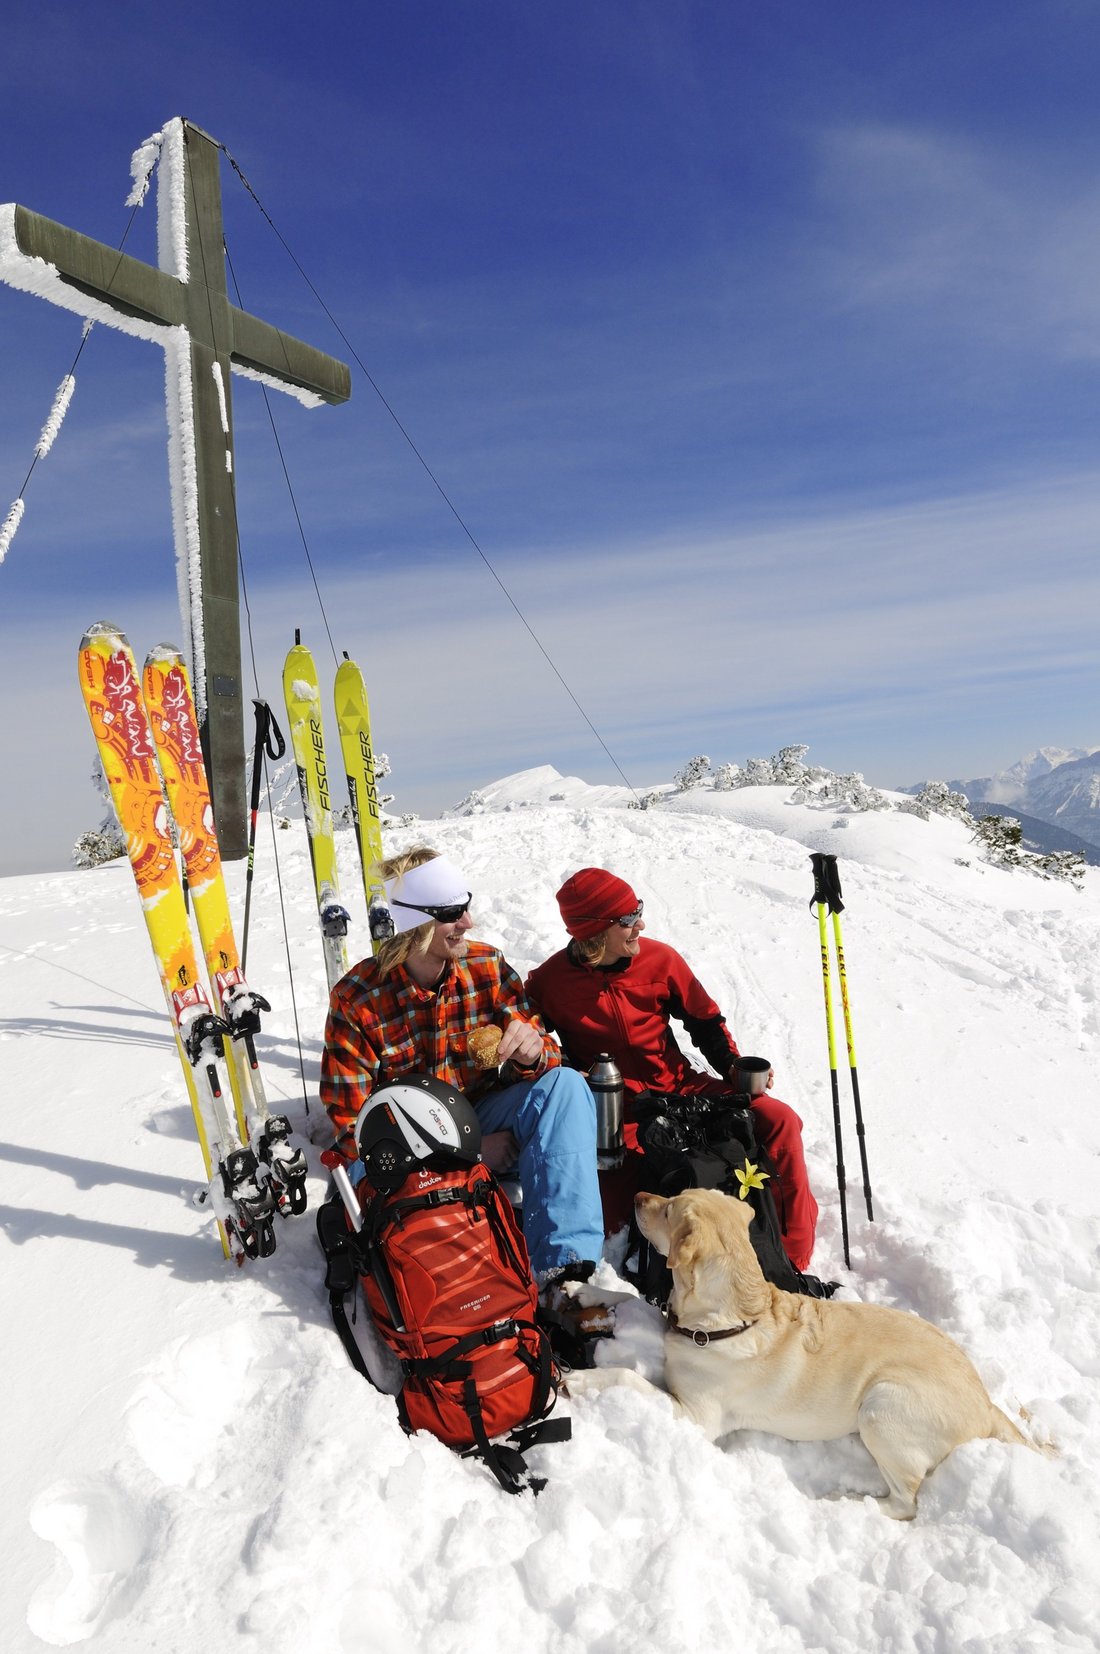 Ski tour and happiness on the summit